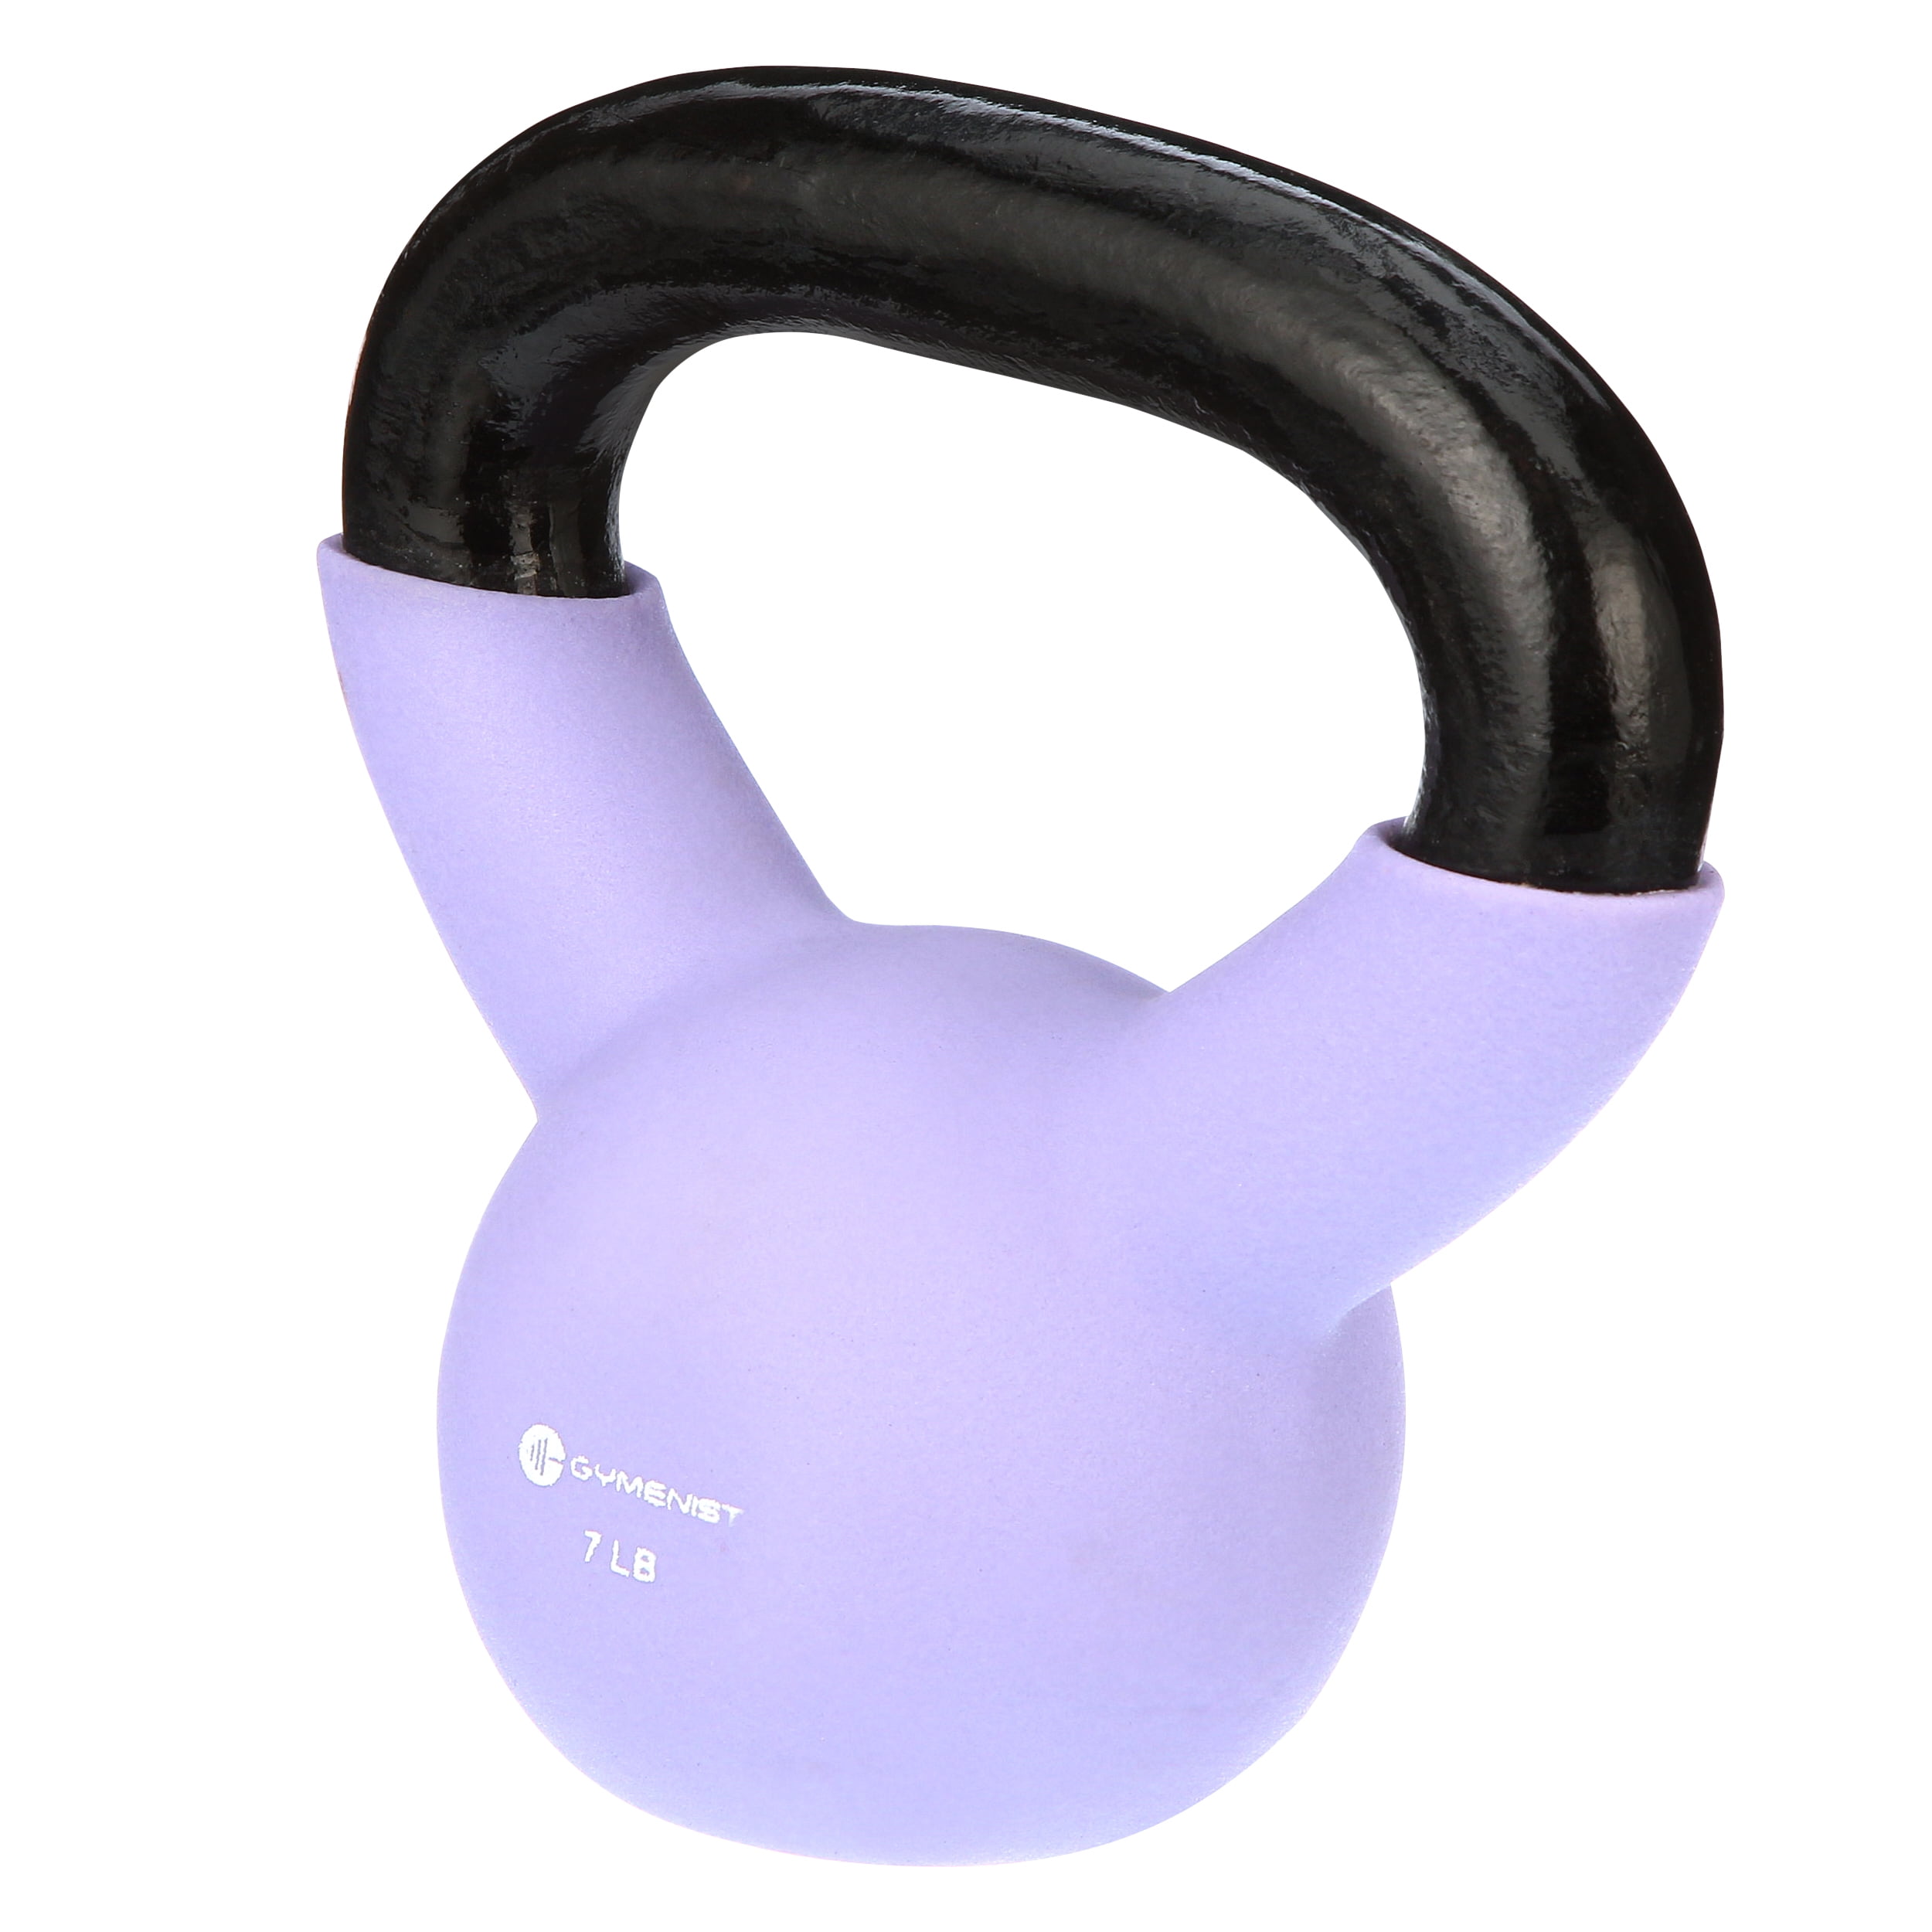 GYMENIST Kettlebell Fitness Iron Weights with Neoprene Coating Around The Bottom Half of The Metal Kettle Bell 